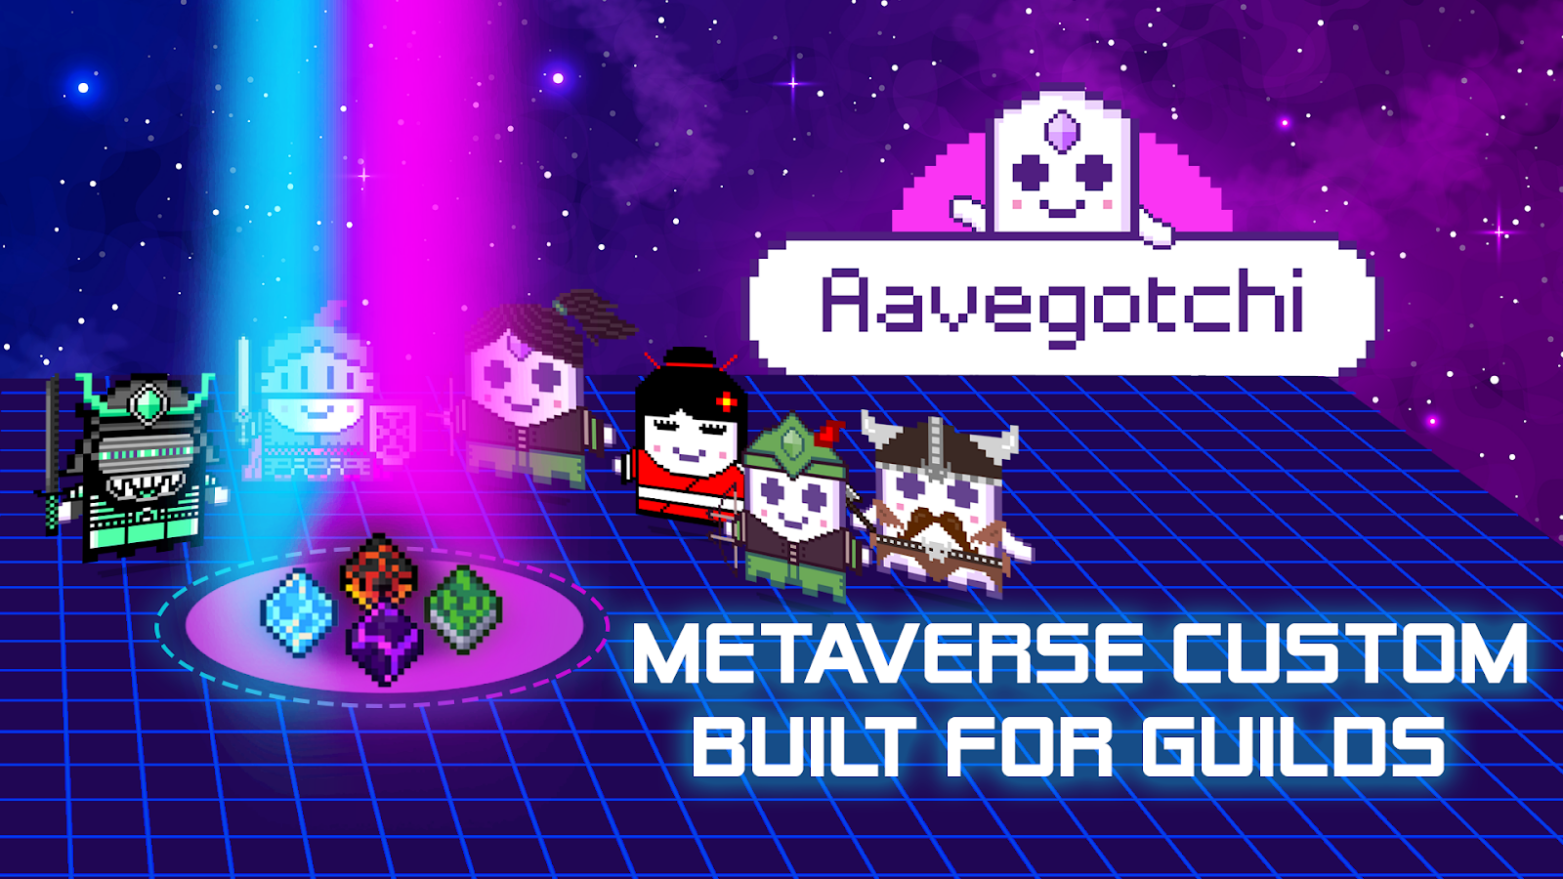 Aavegotchi is a popular metaverse game by Pixelcraft Studio.